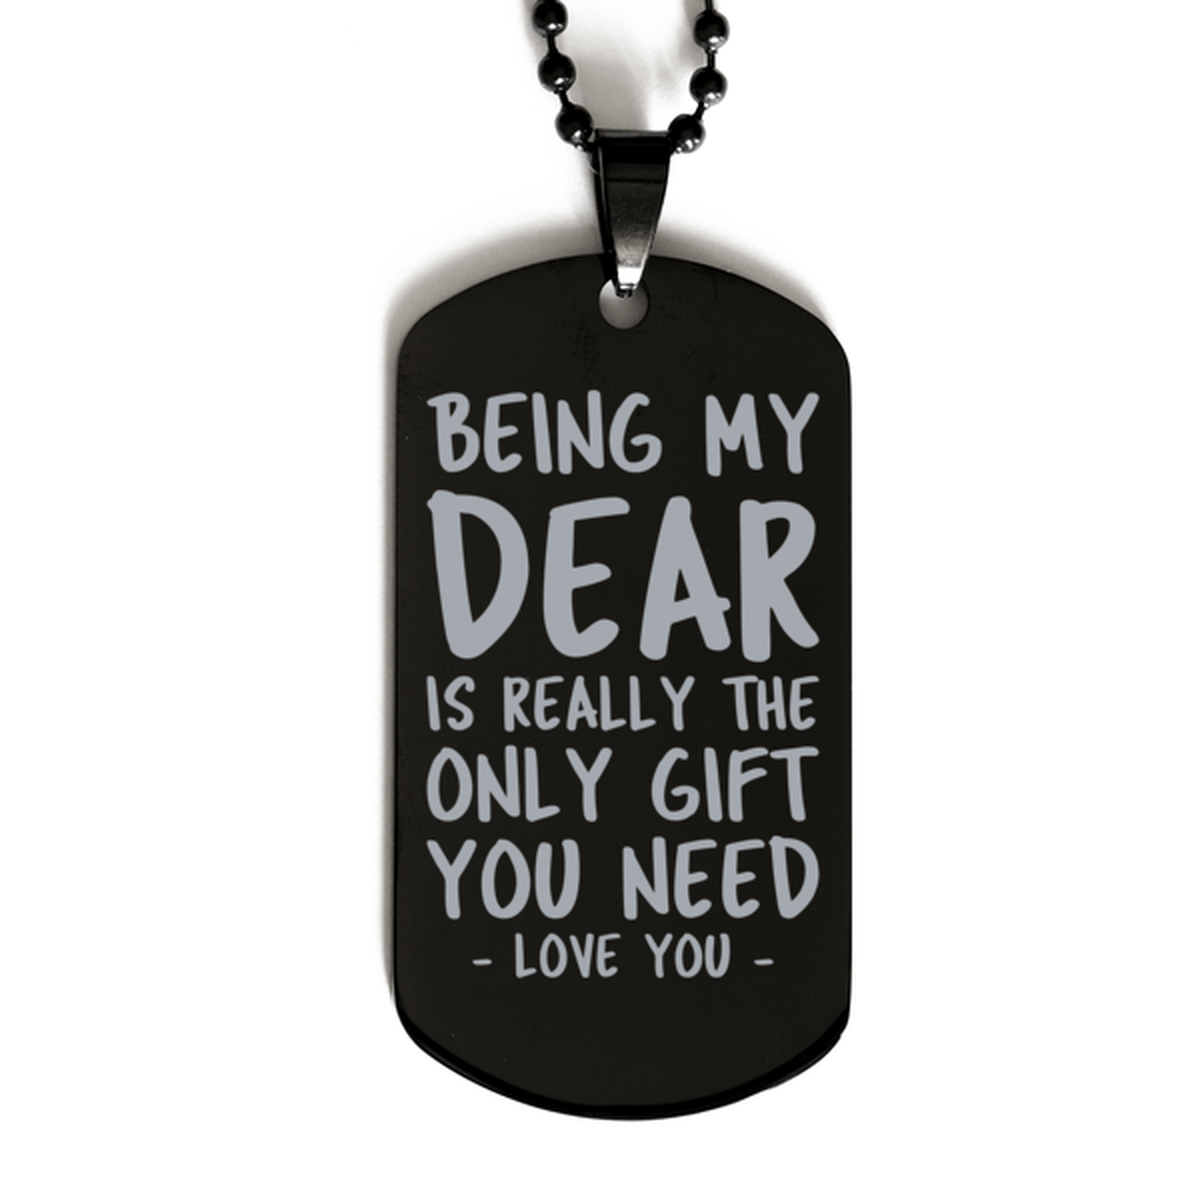 Funny Dear Black Dog Tag Necklace, Being My Dear Is Really the Only Gift You Need, Best Birthday Gifts for Dear